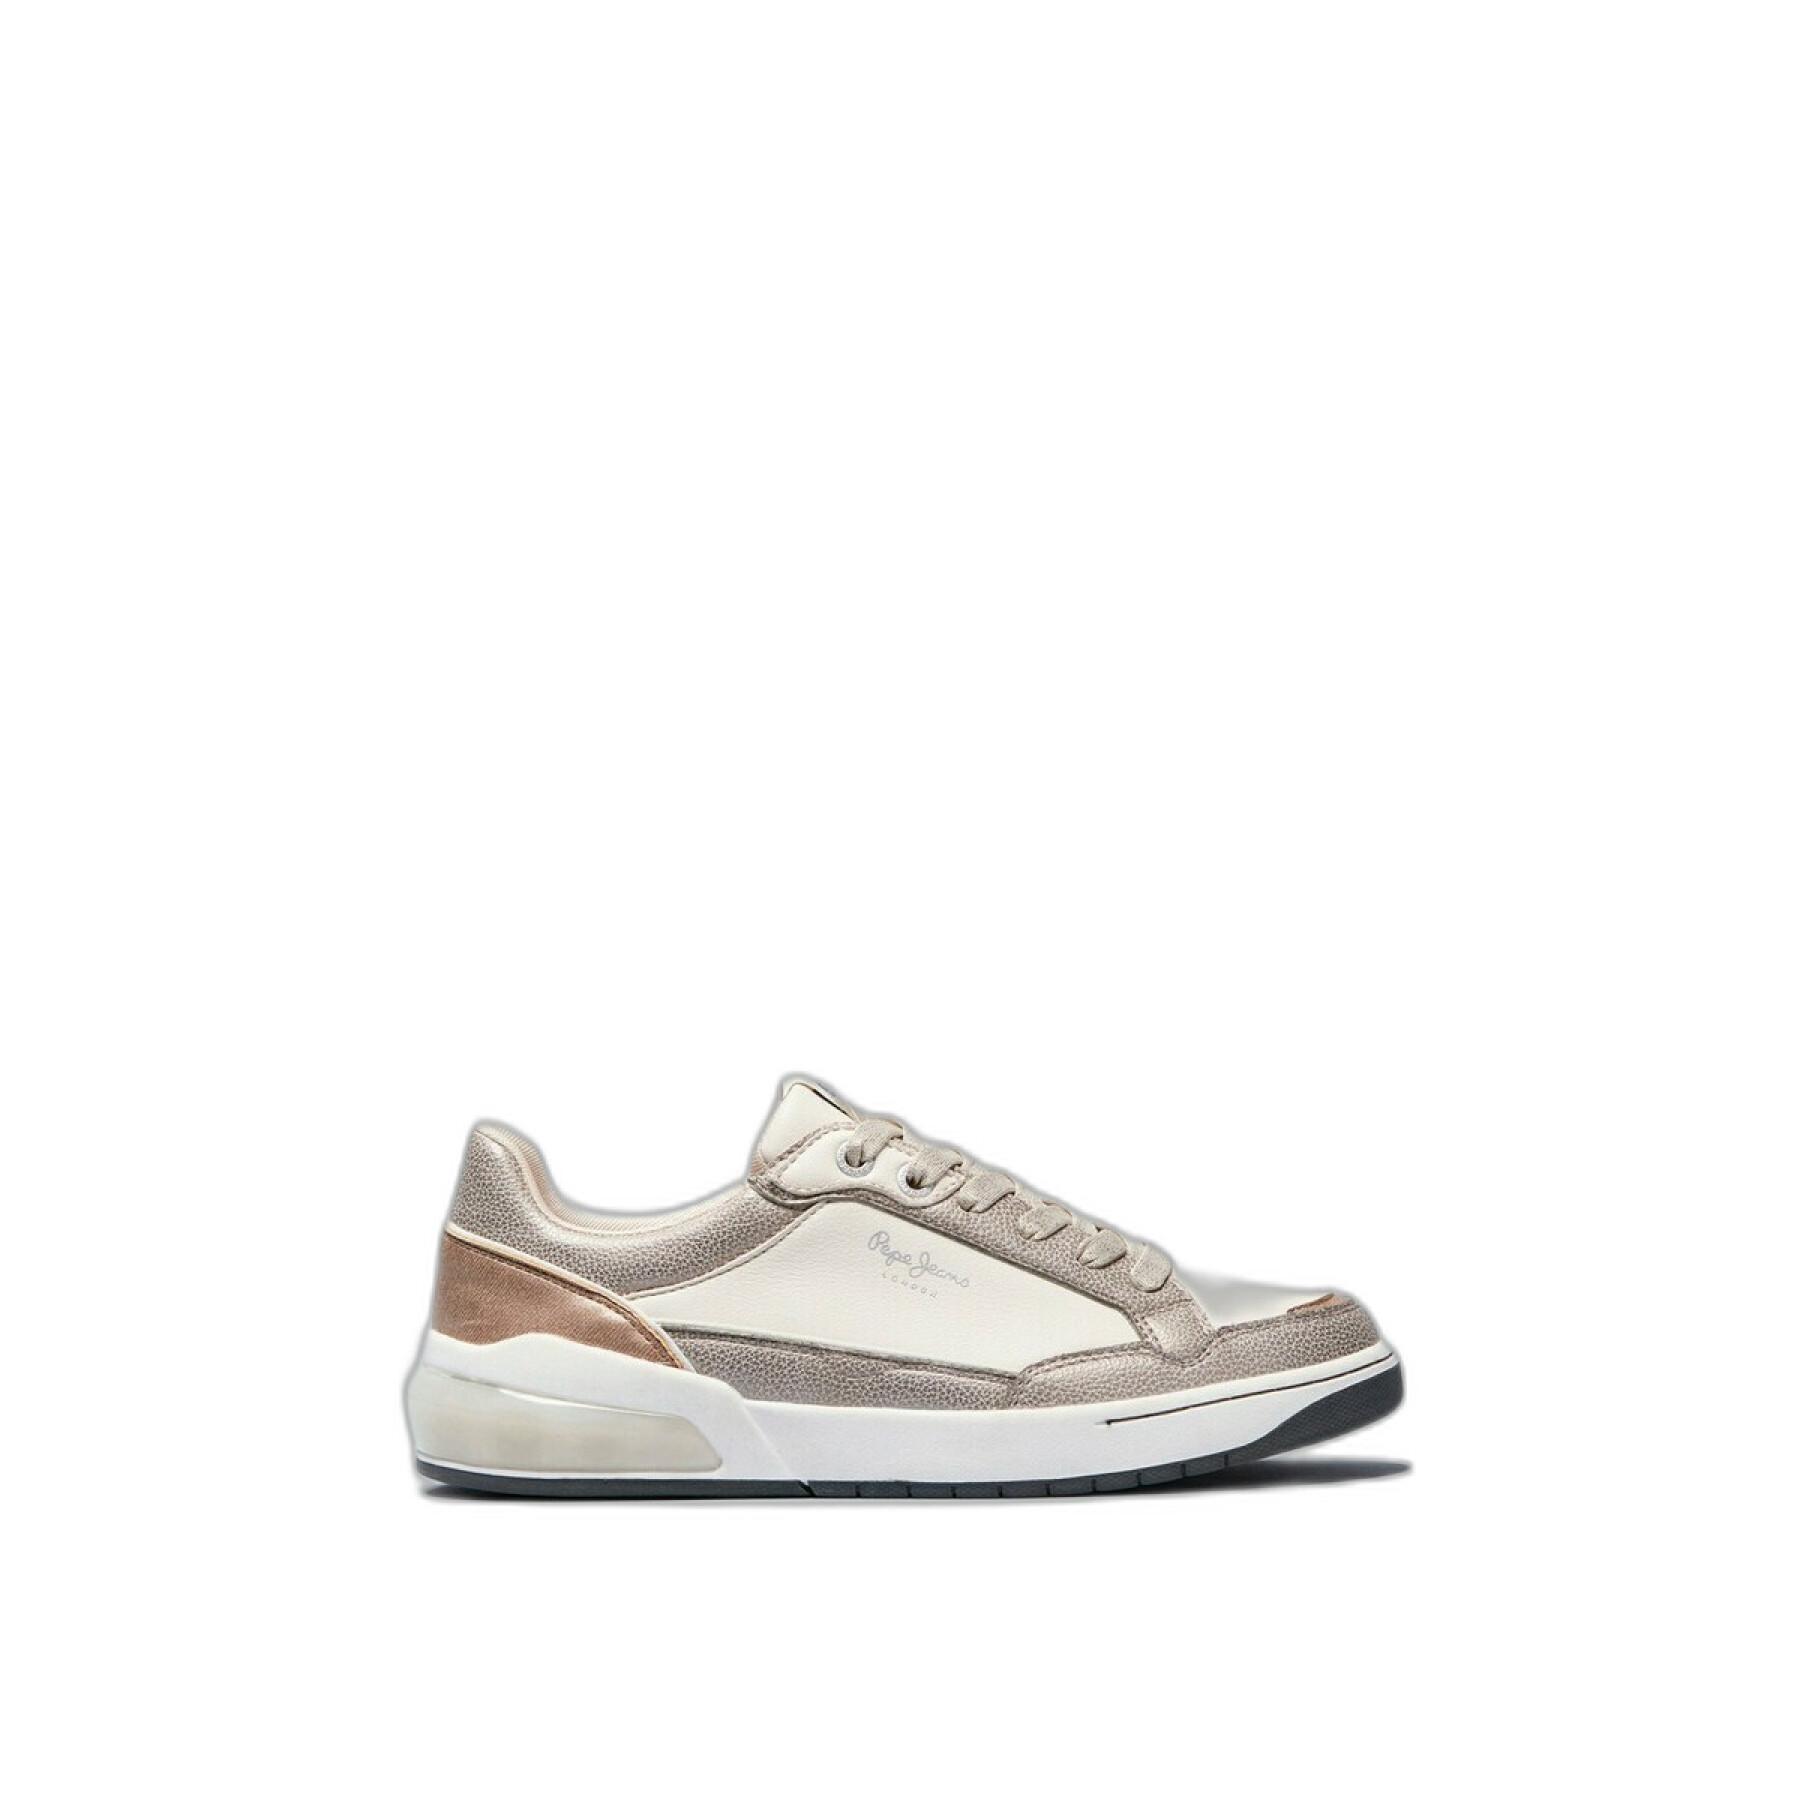 Formadoras de mulheres Pepe Jeans Marble Glam